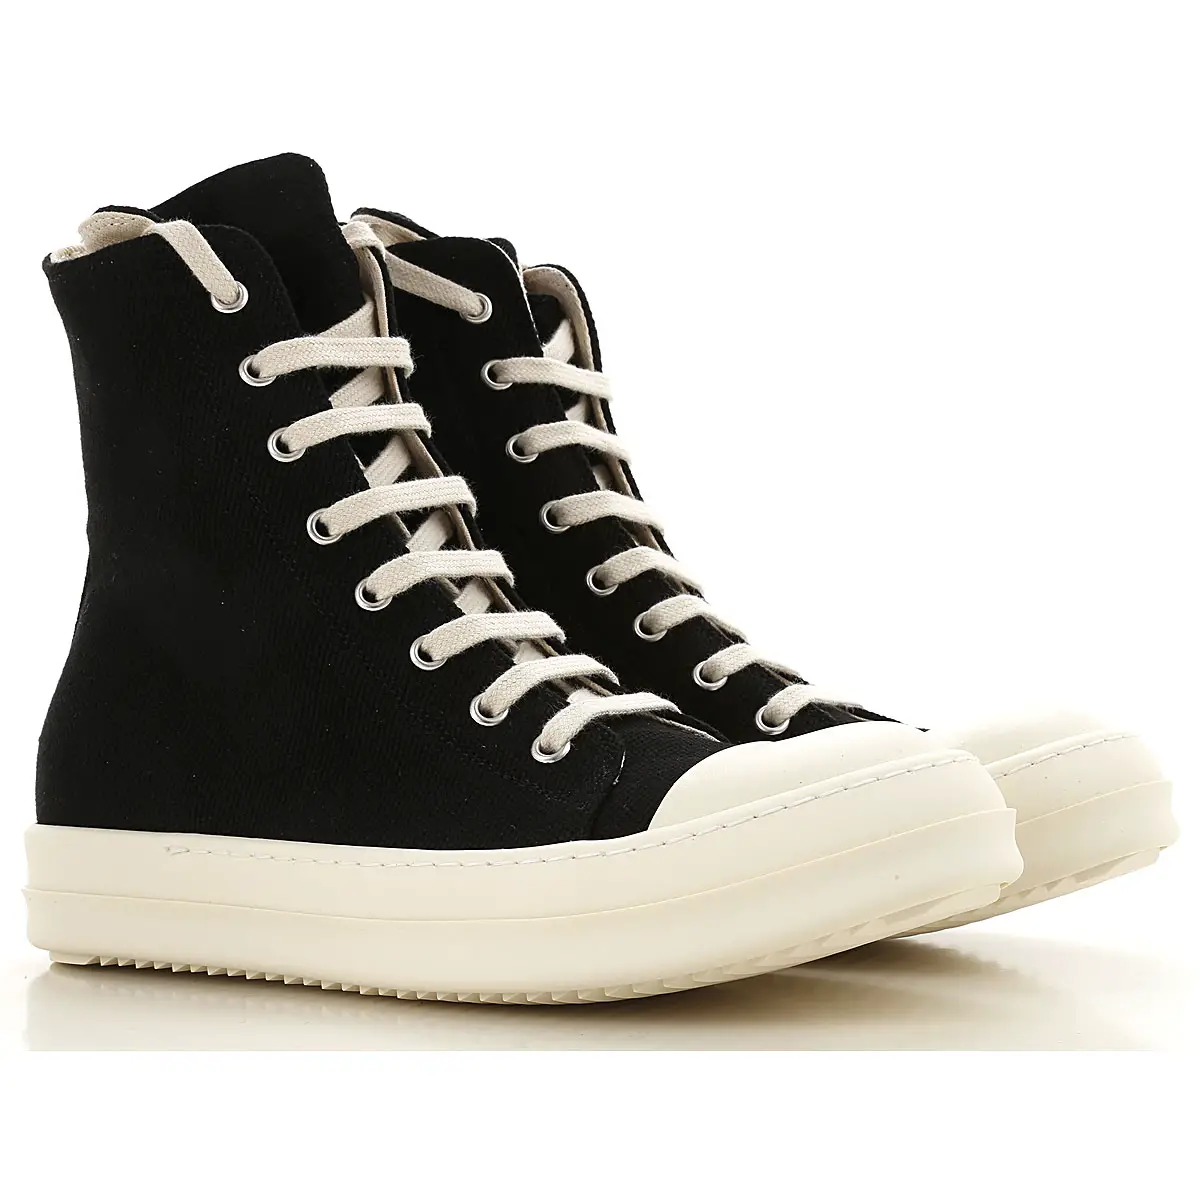 Womens Shoes Rick Owens DRKSHDW, Style code: ds18f7800